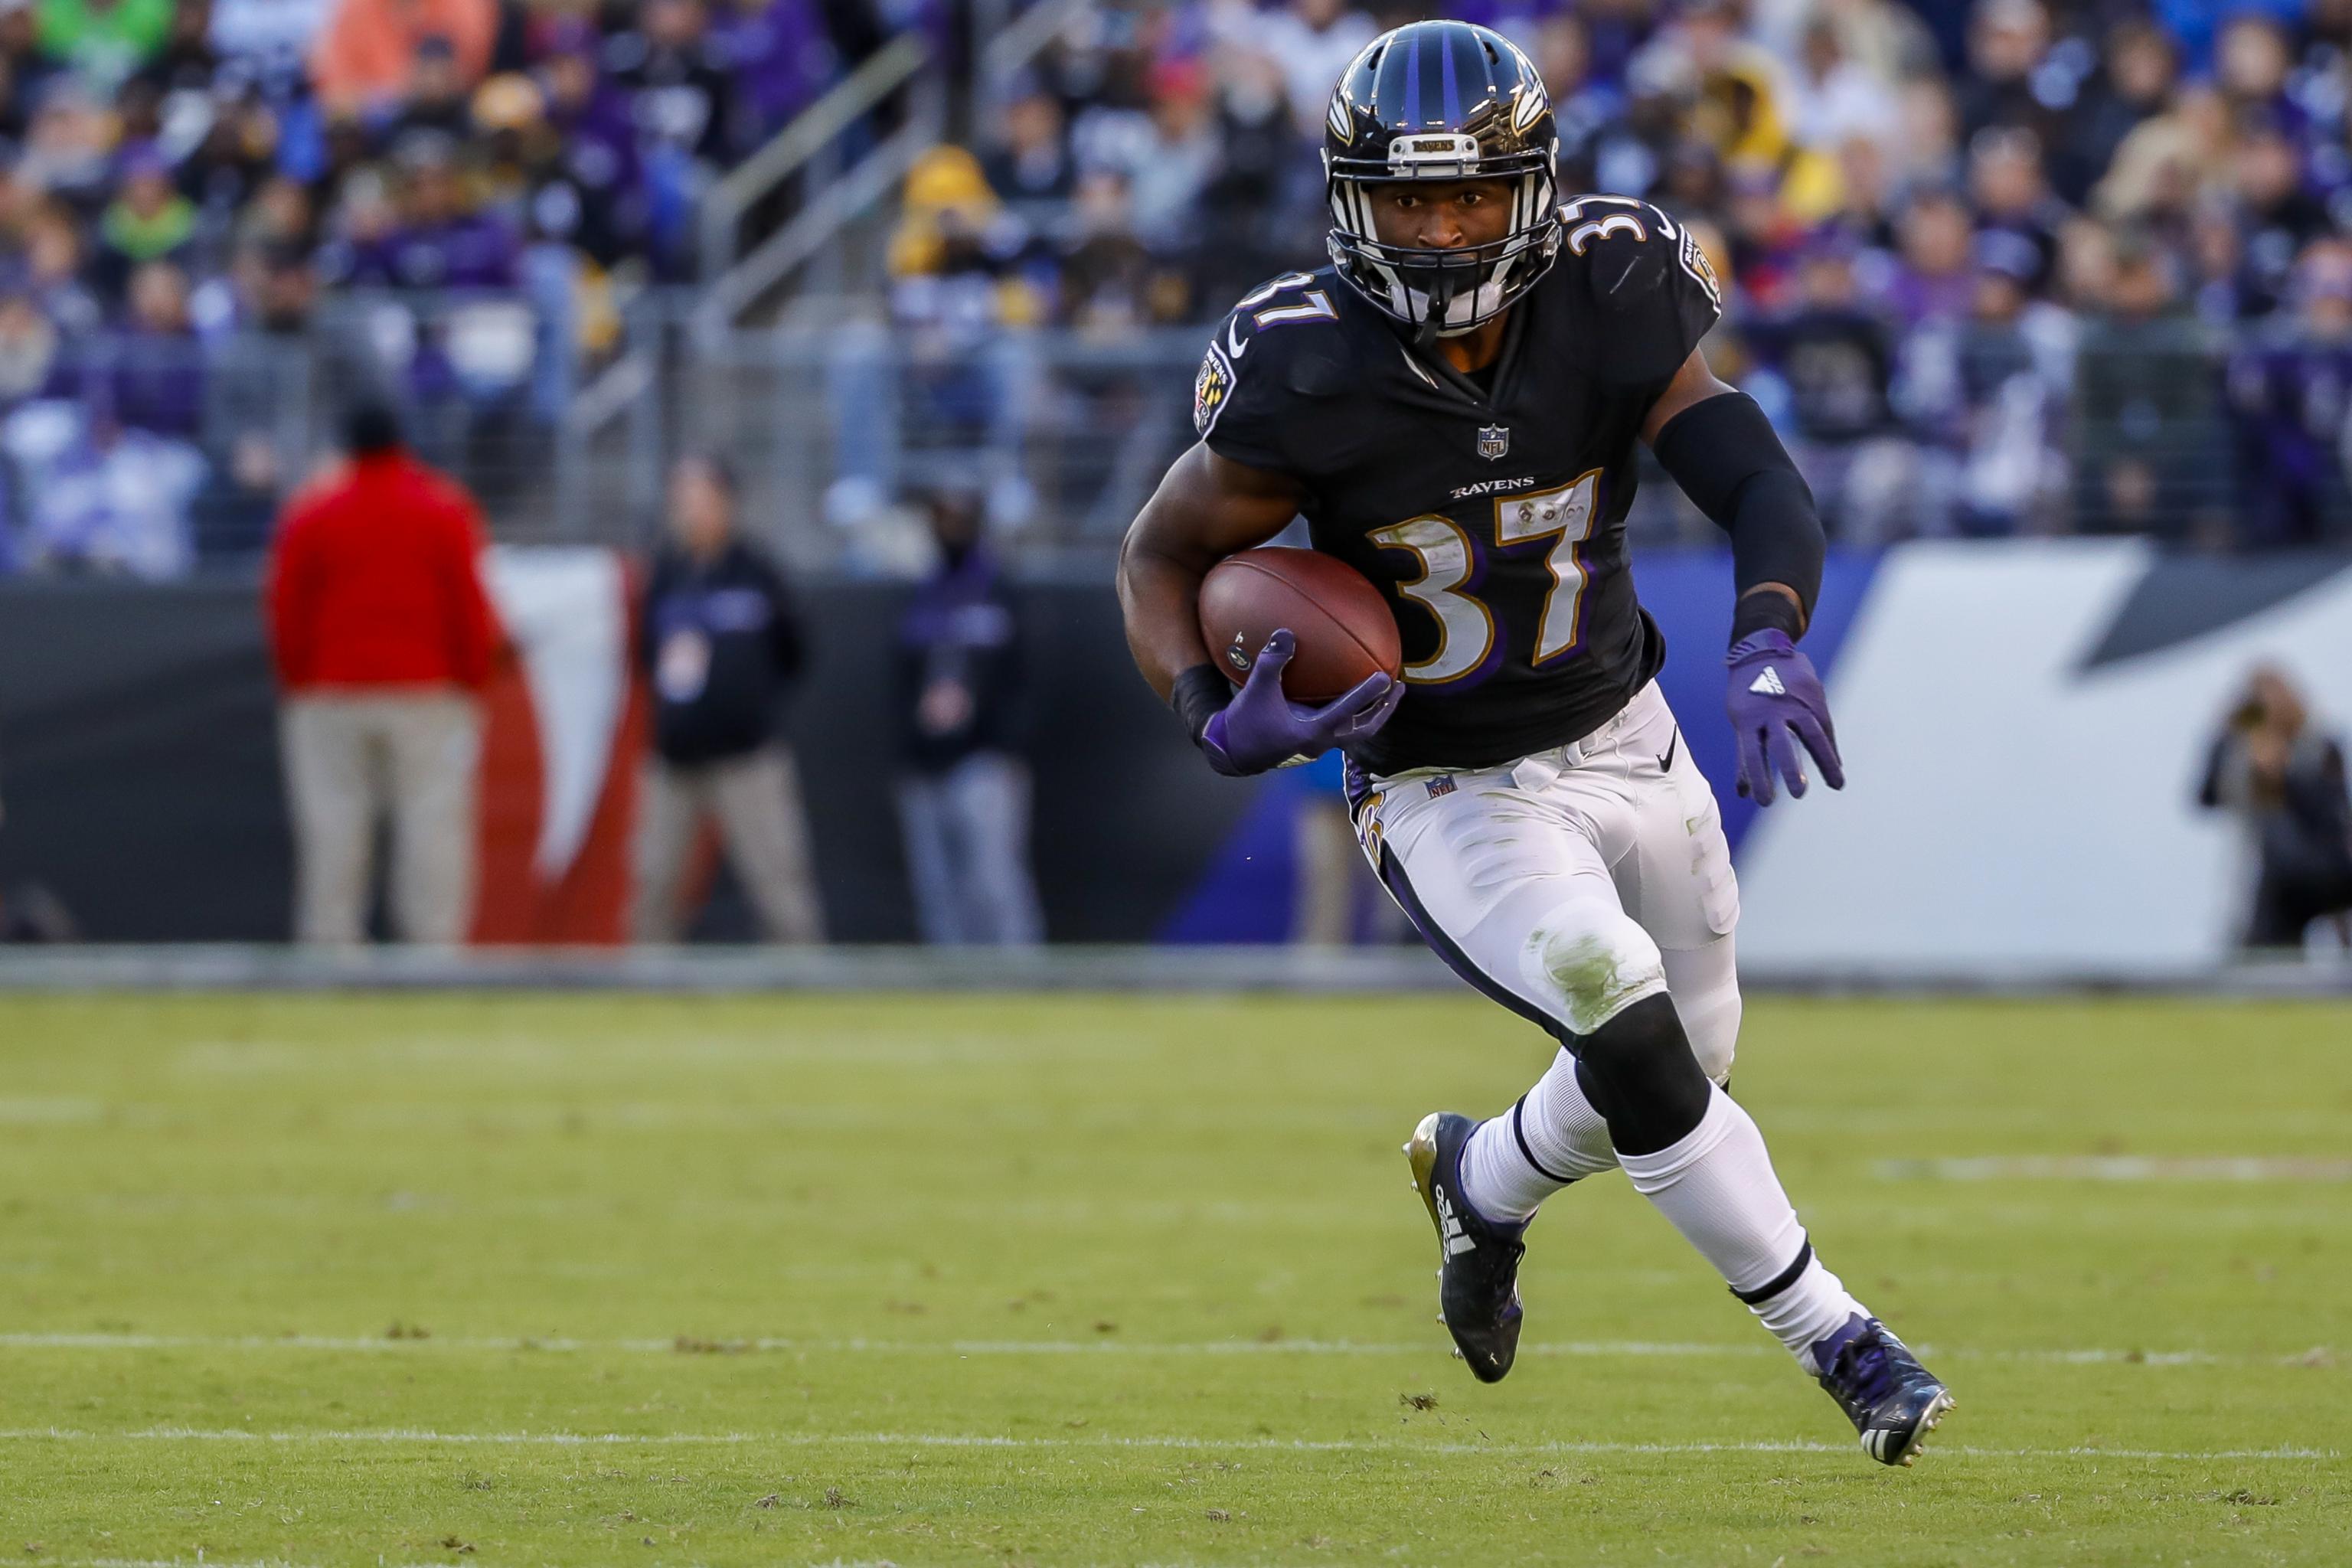 Saints News: RB Javorius Allen Signs Contract After 4 Years with Ravens, News, Scores, Highlights, Stats, and Rumors